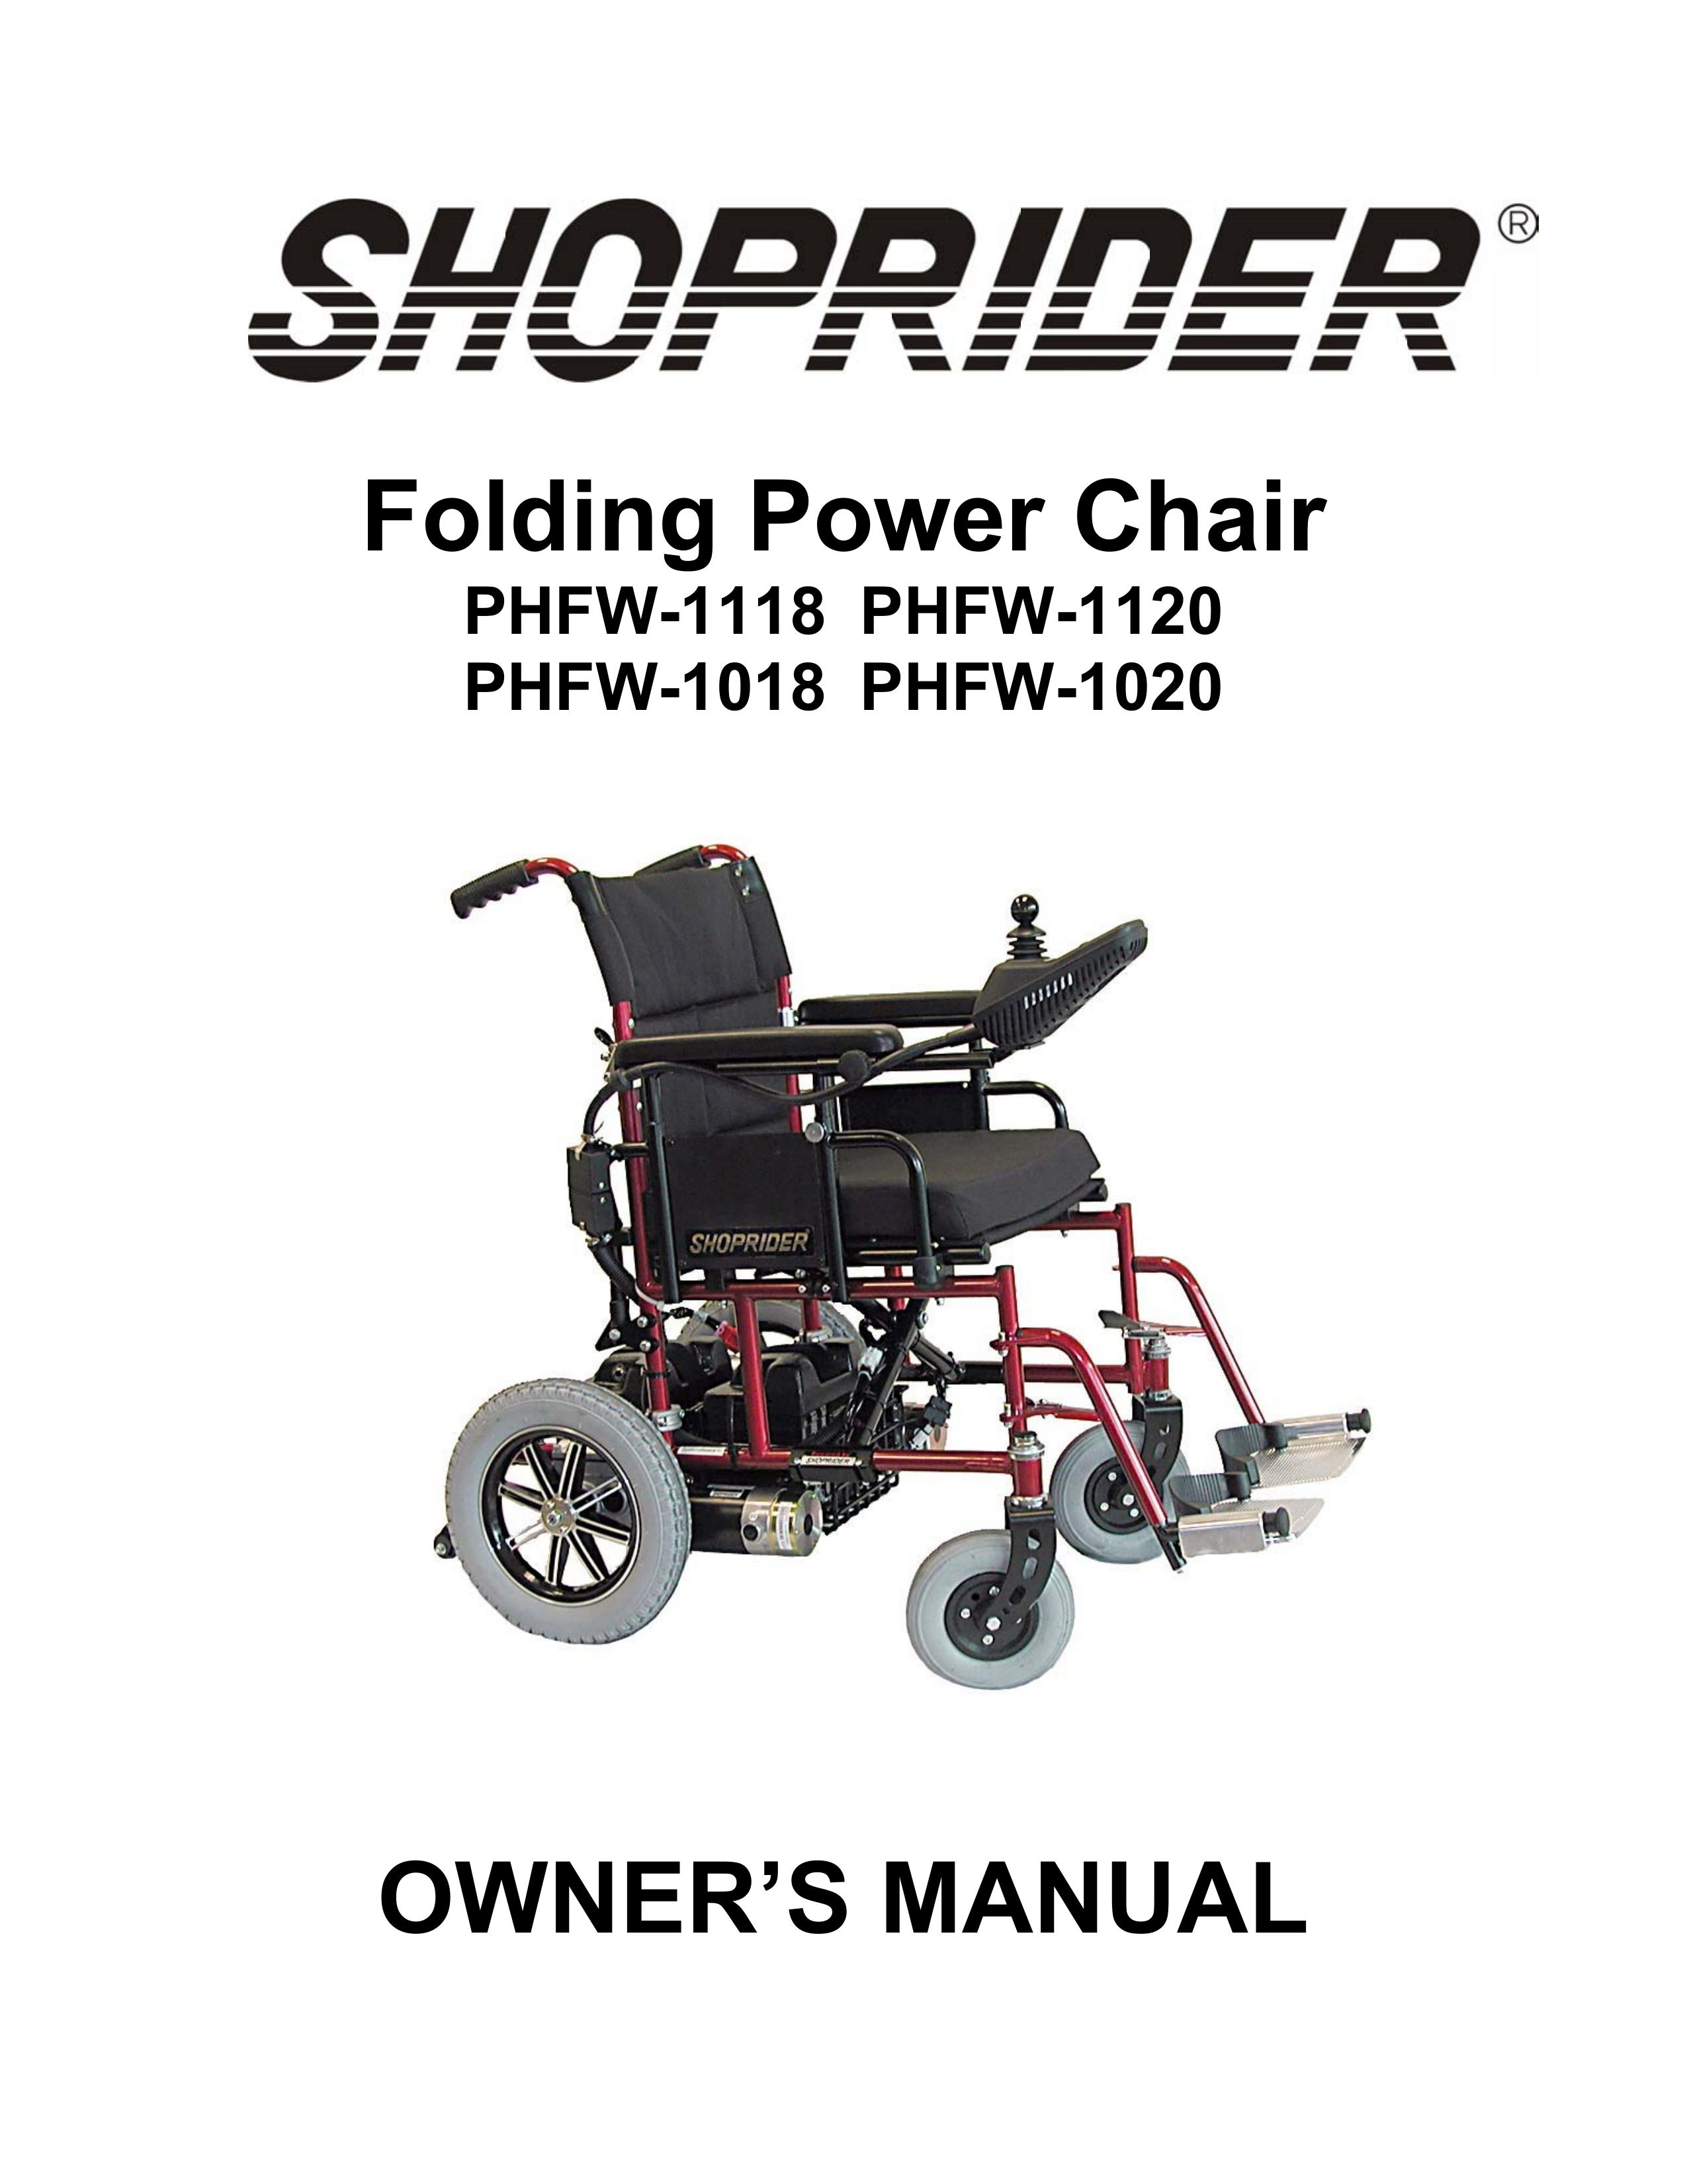 Shoprider PHFW-1020 Mobility Aid User Manual